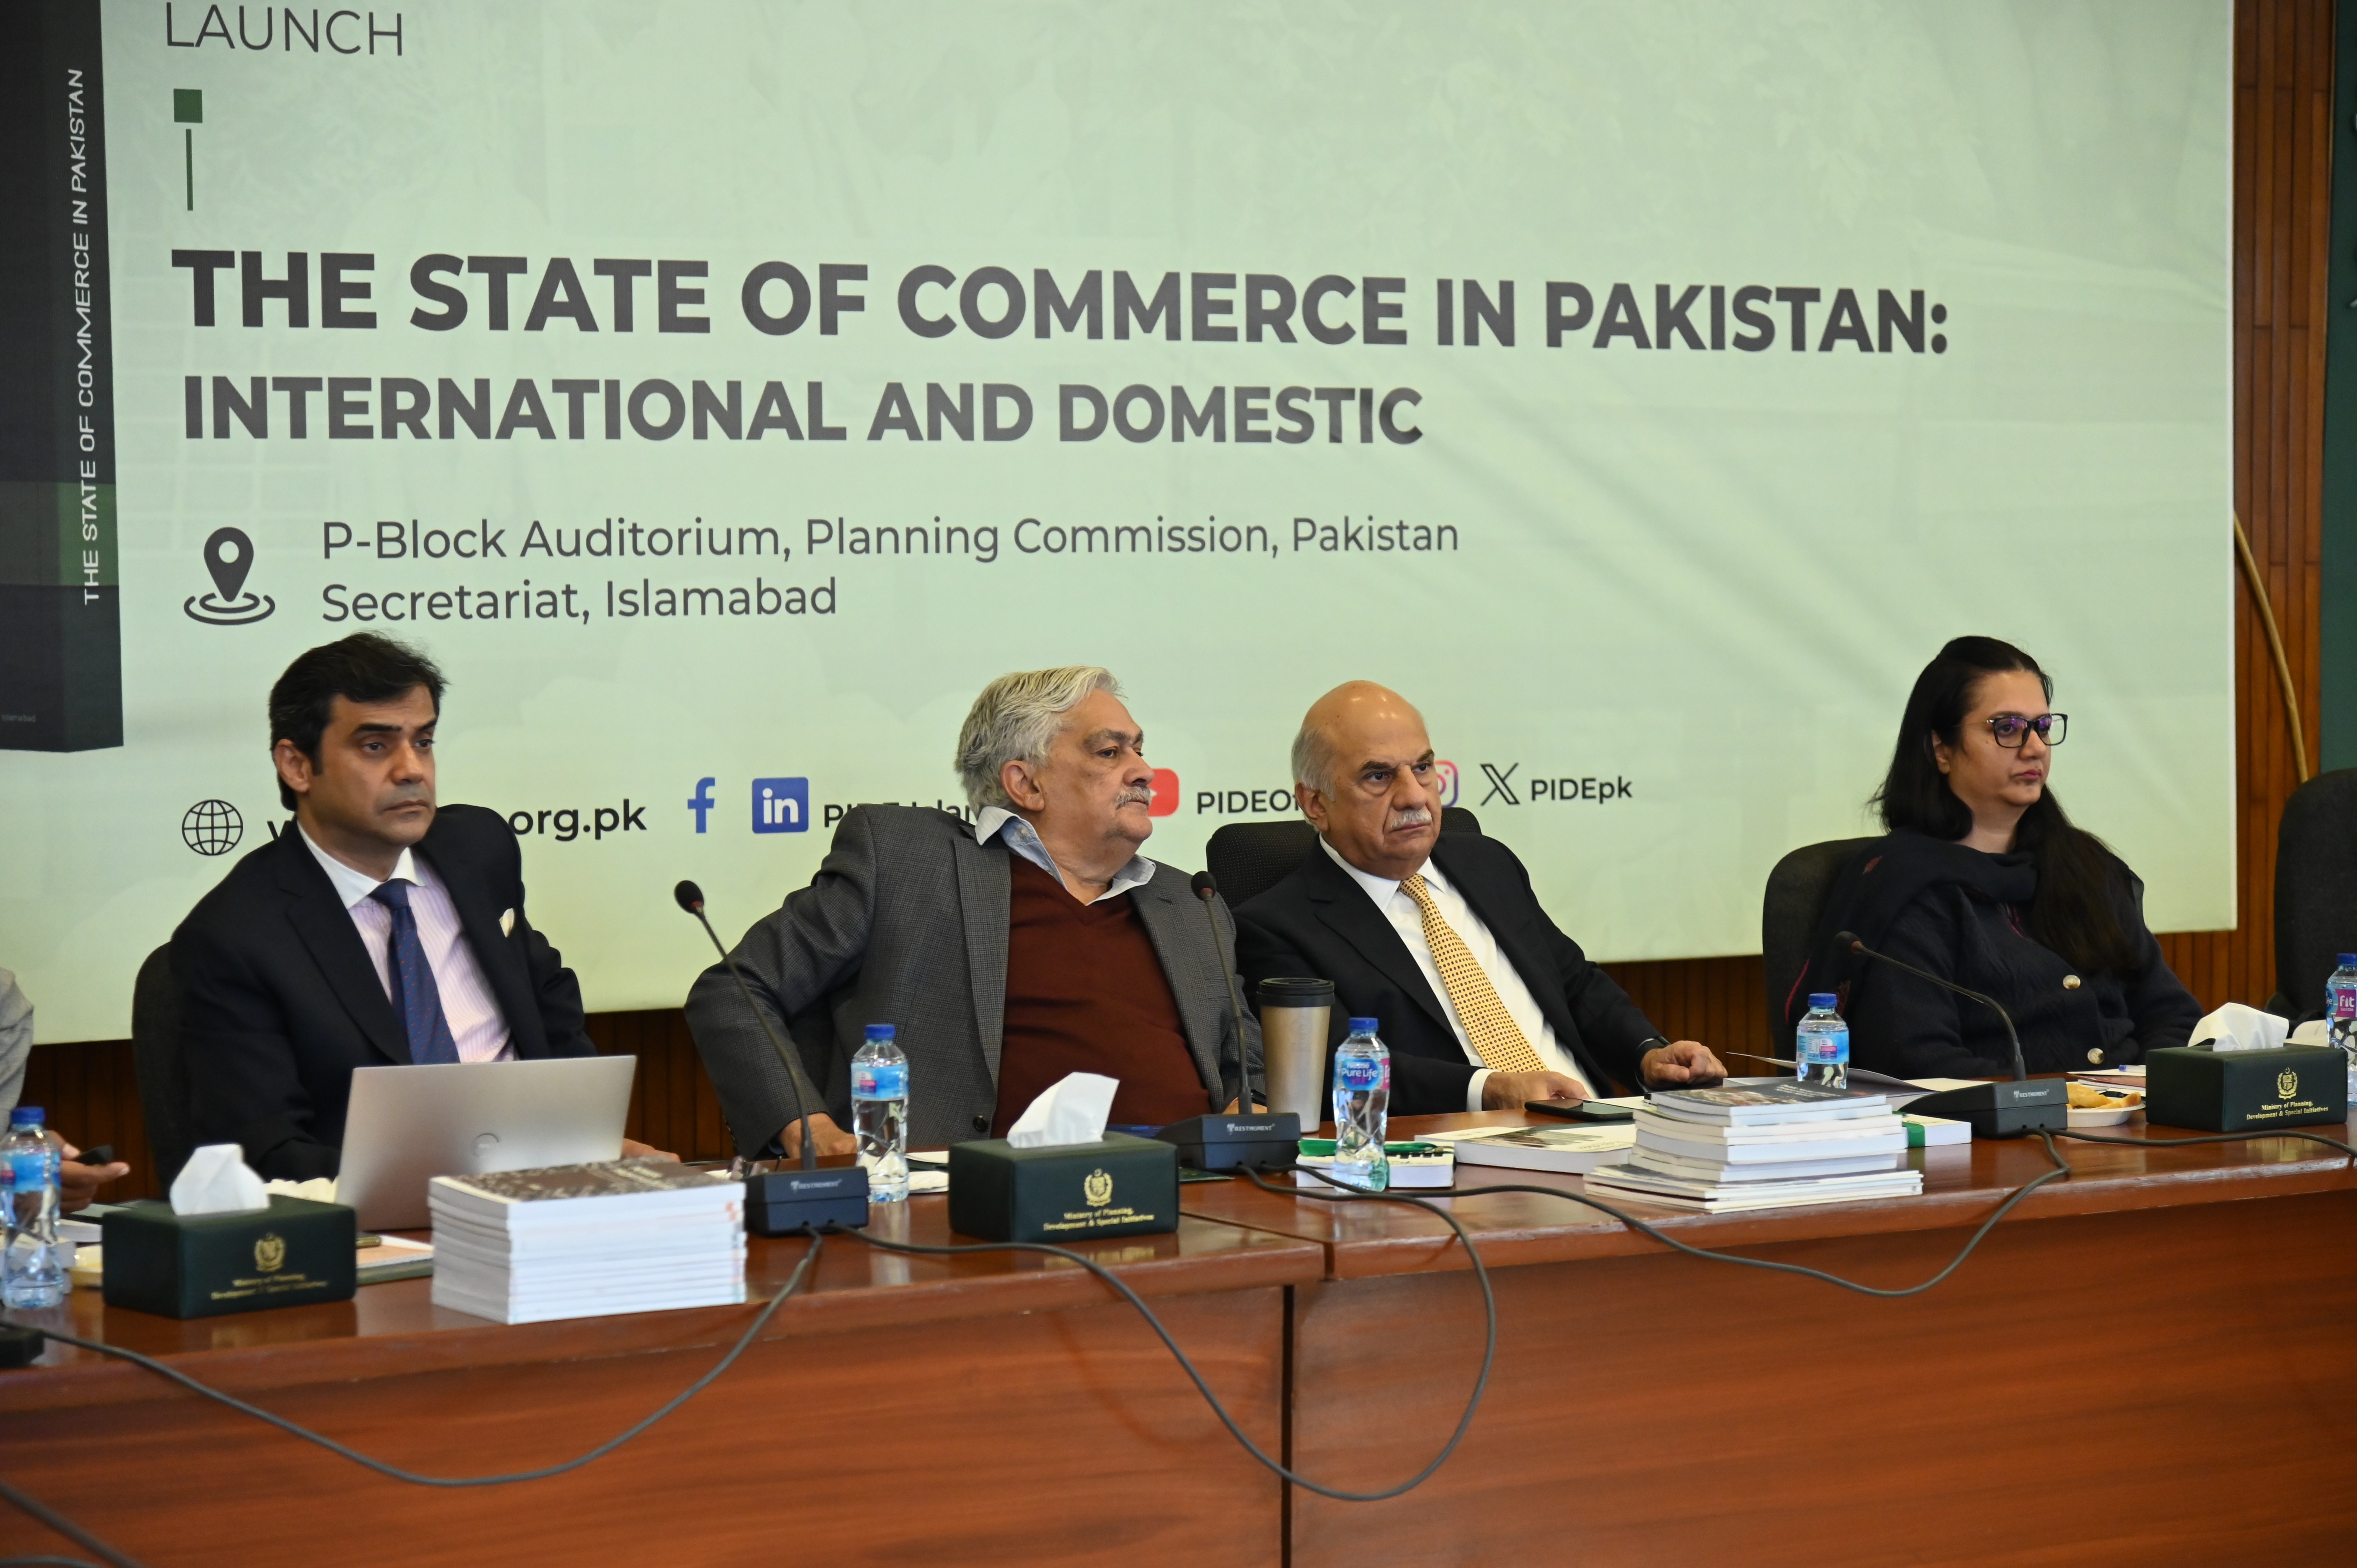 The Group of the Higher Officials of the Planning Commission of Pakistan headed by Dr. Mohammad Jehanzeb Khan, Deputy Chairman Planning Commission